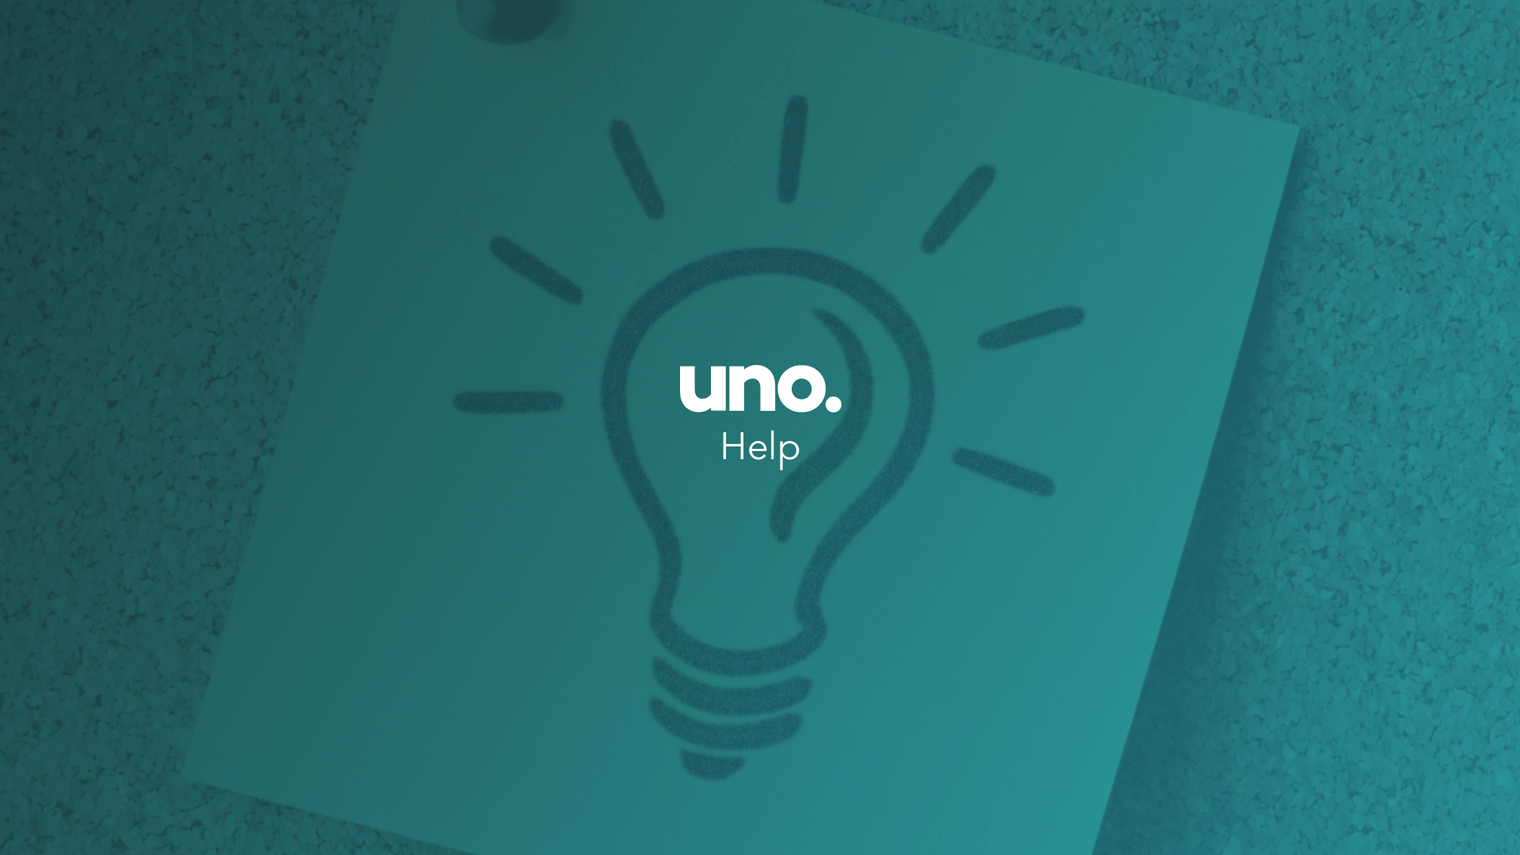 Does uno offer home loans for investment properties?